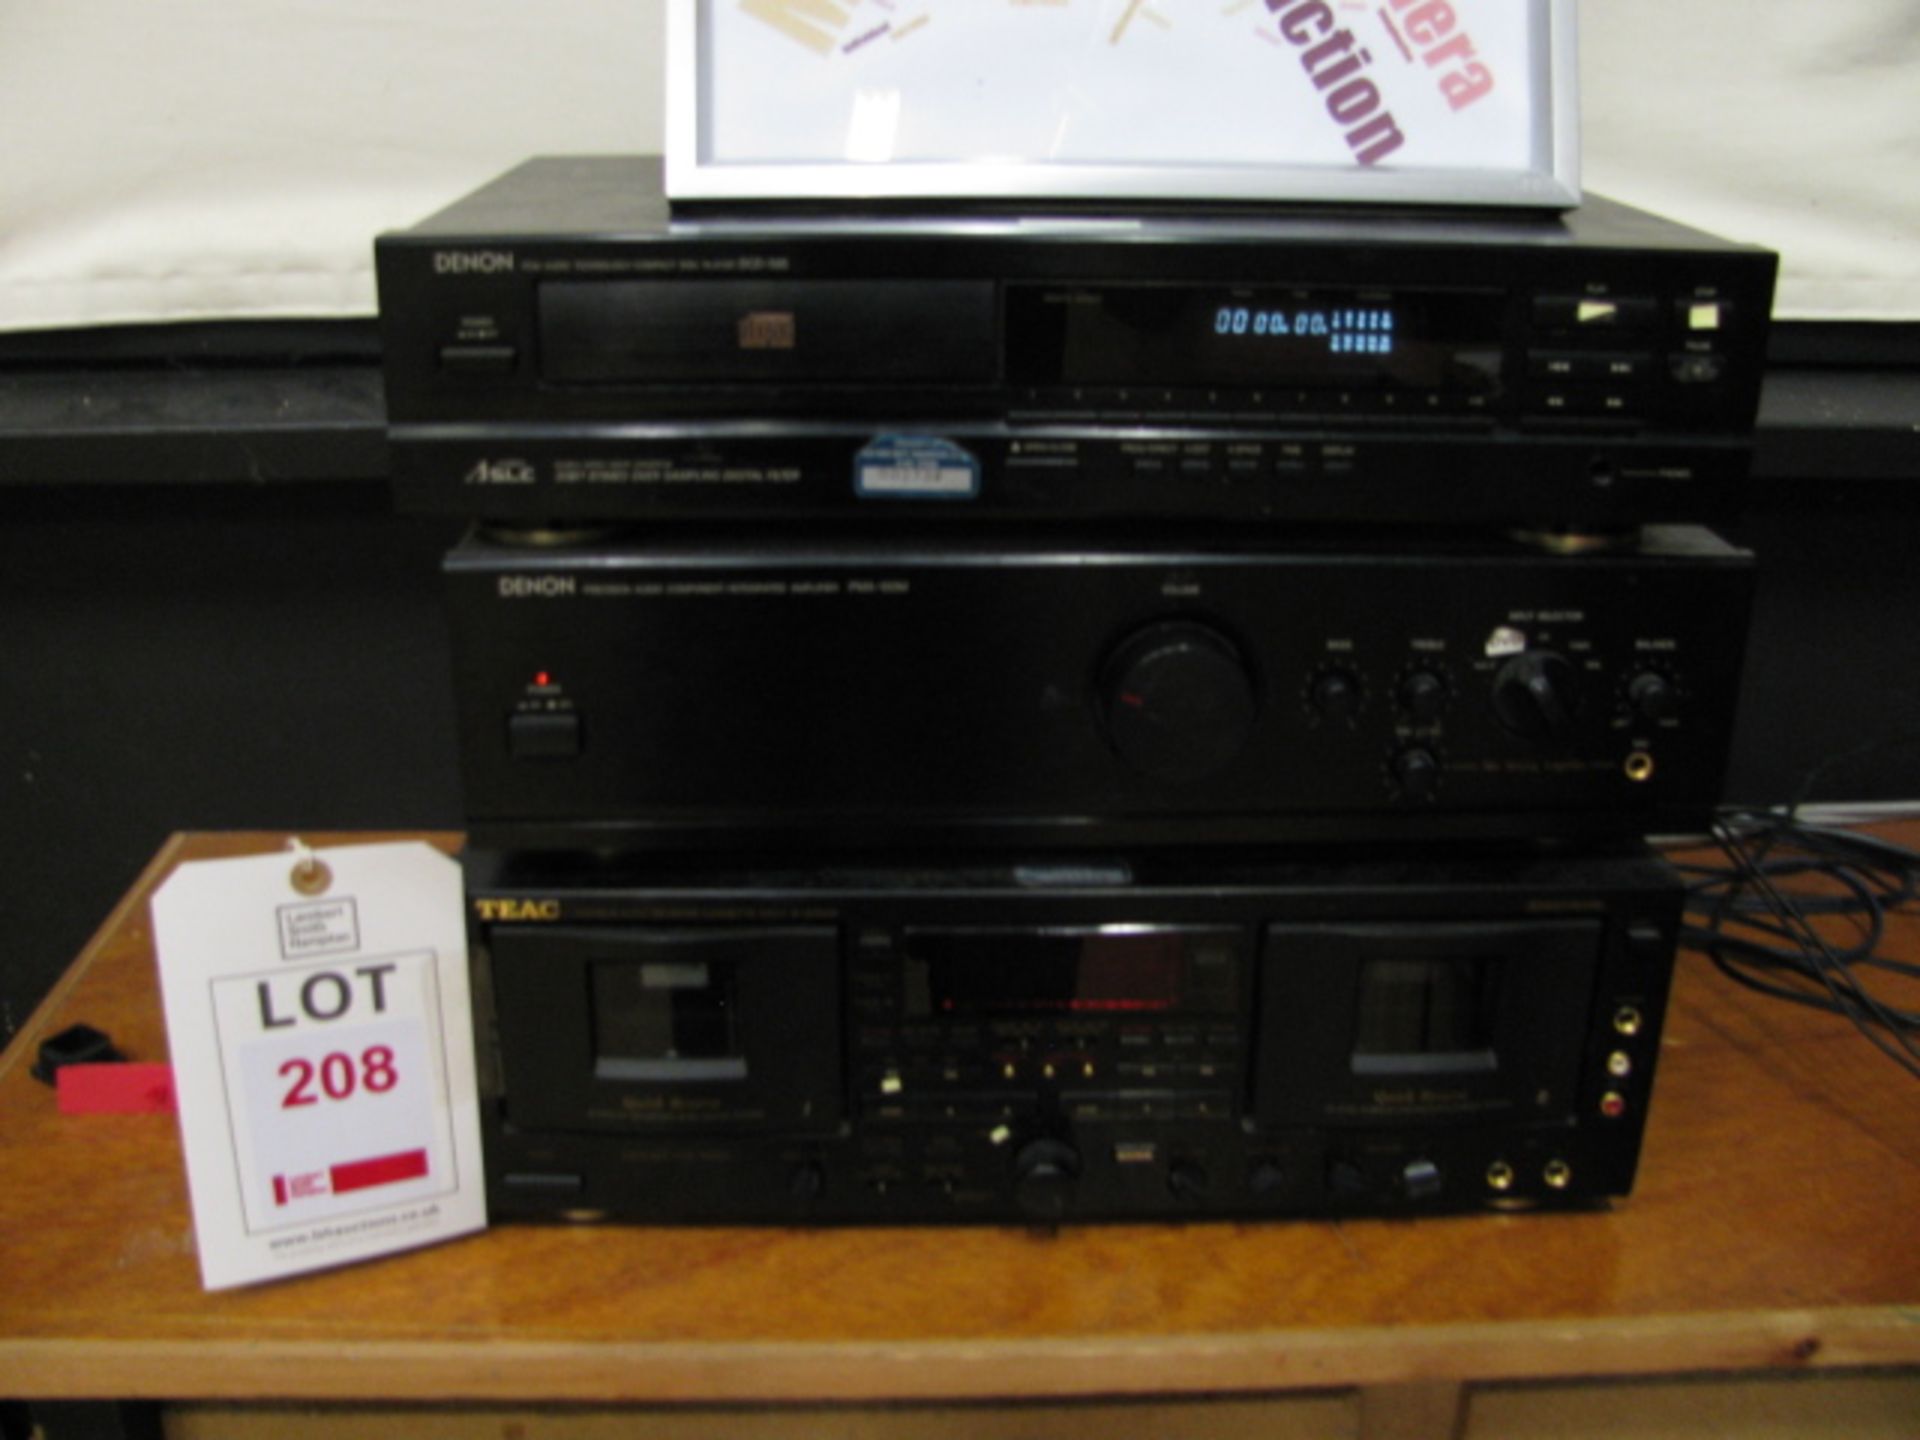 Drama studio music system to include: Denon CD player, Denon amplifier, Teac twin tape deck and